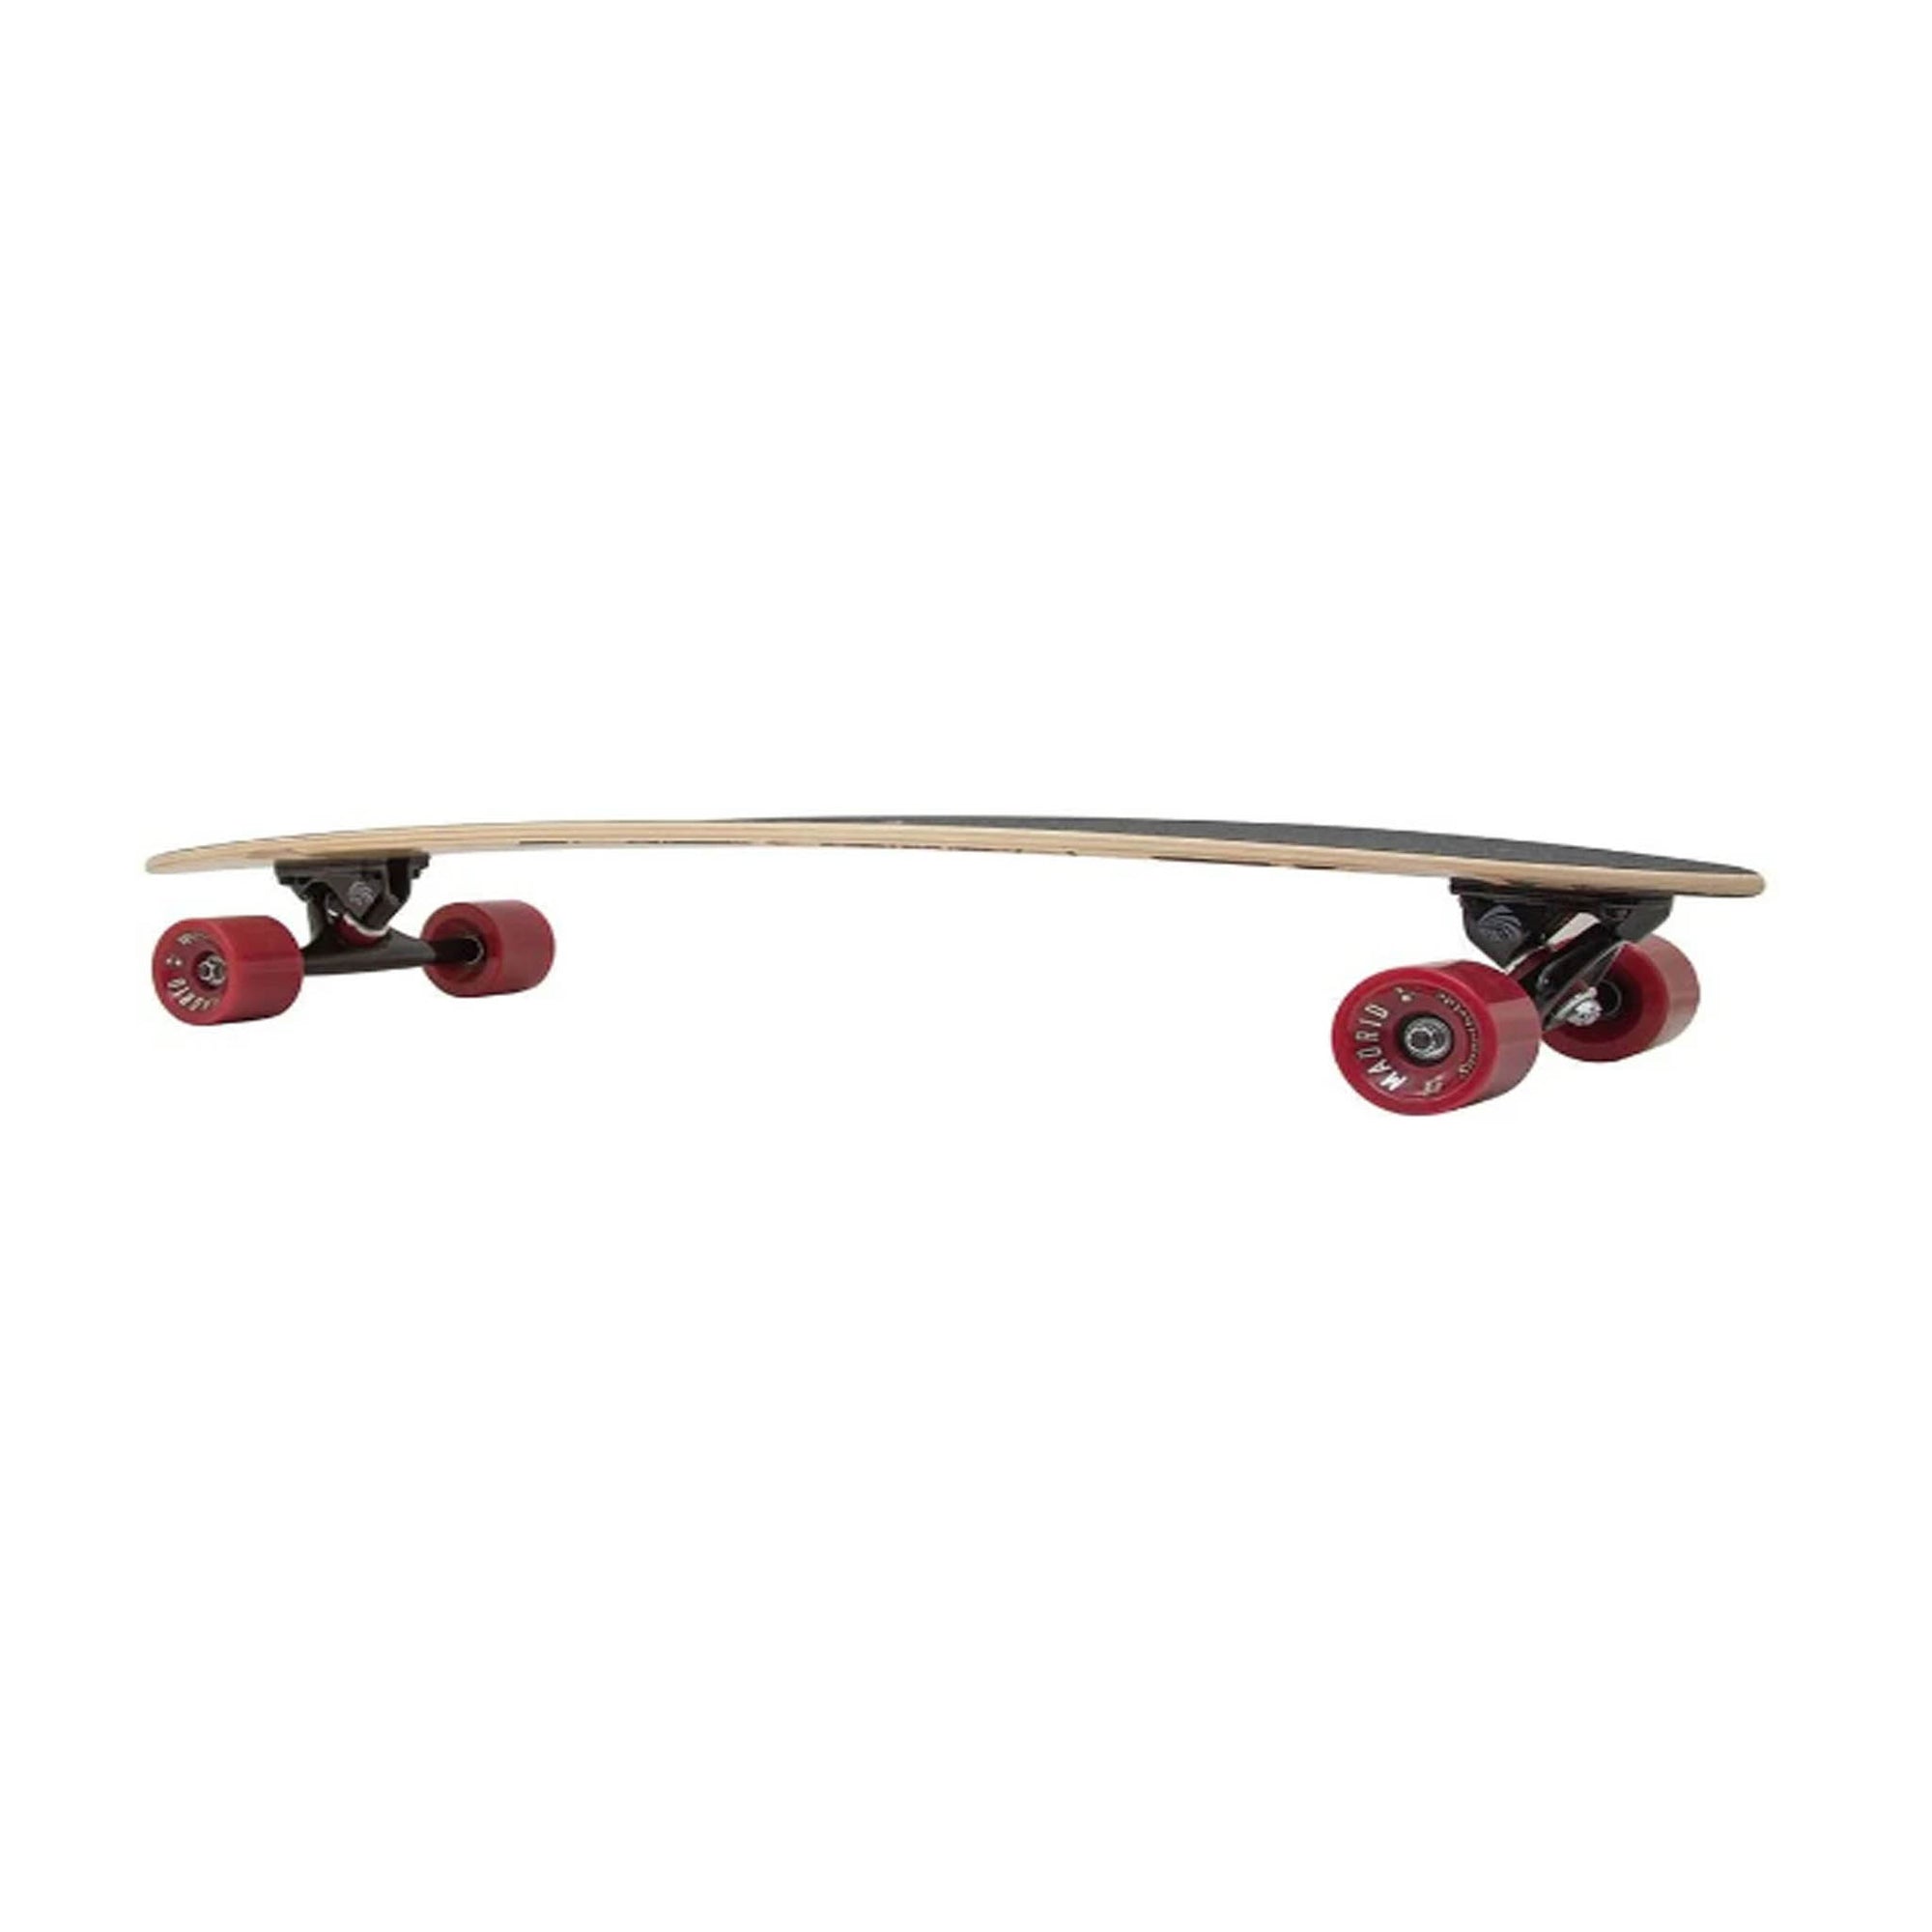 Know more about Longboards